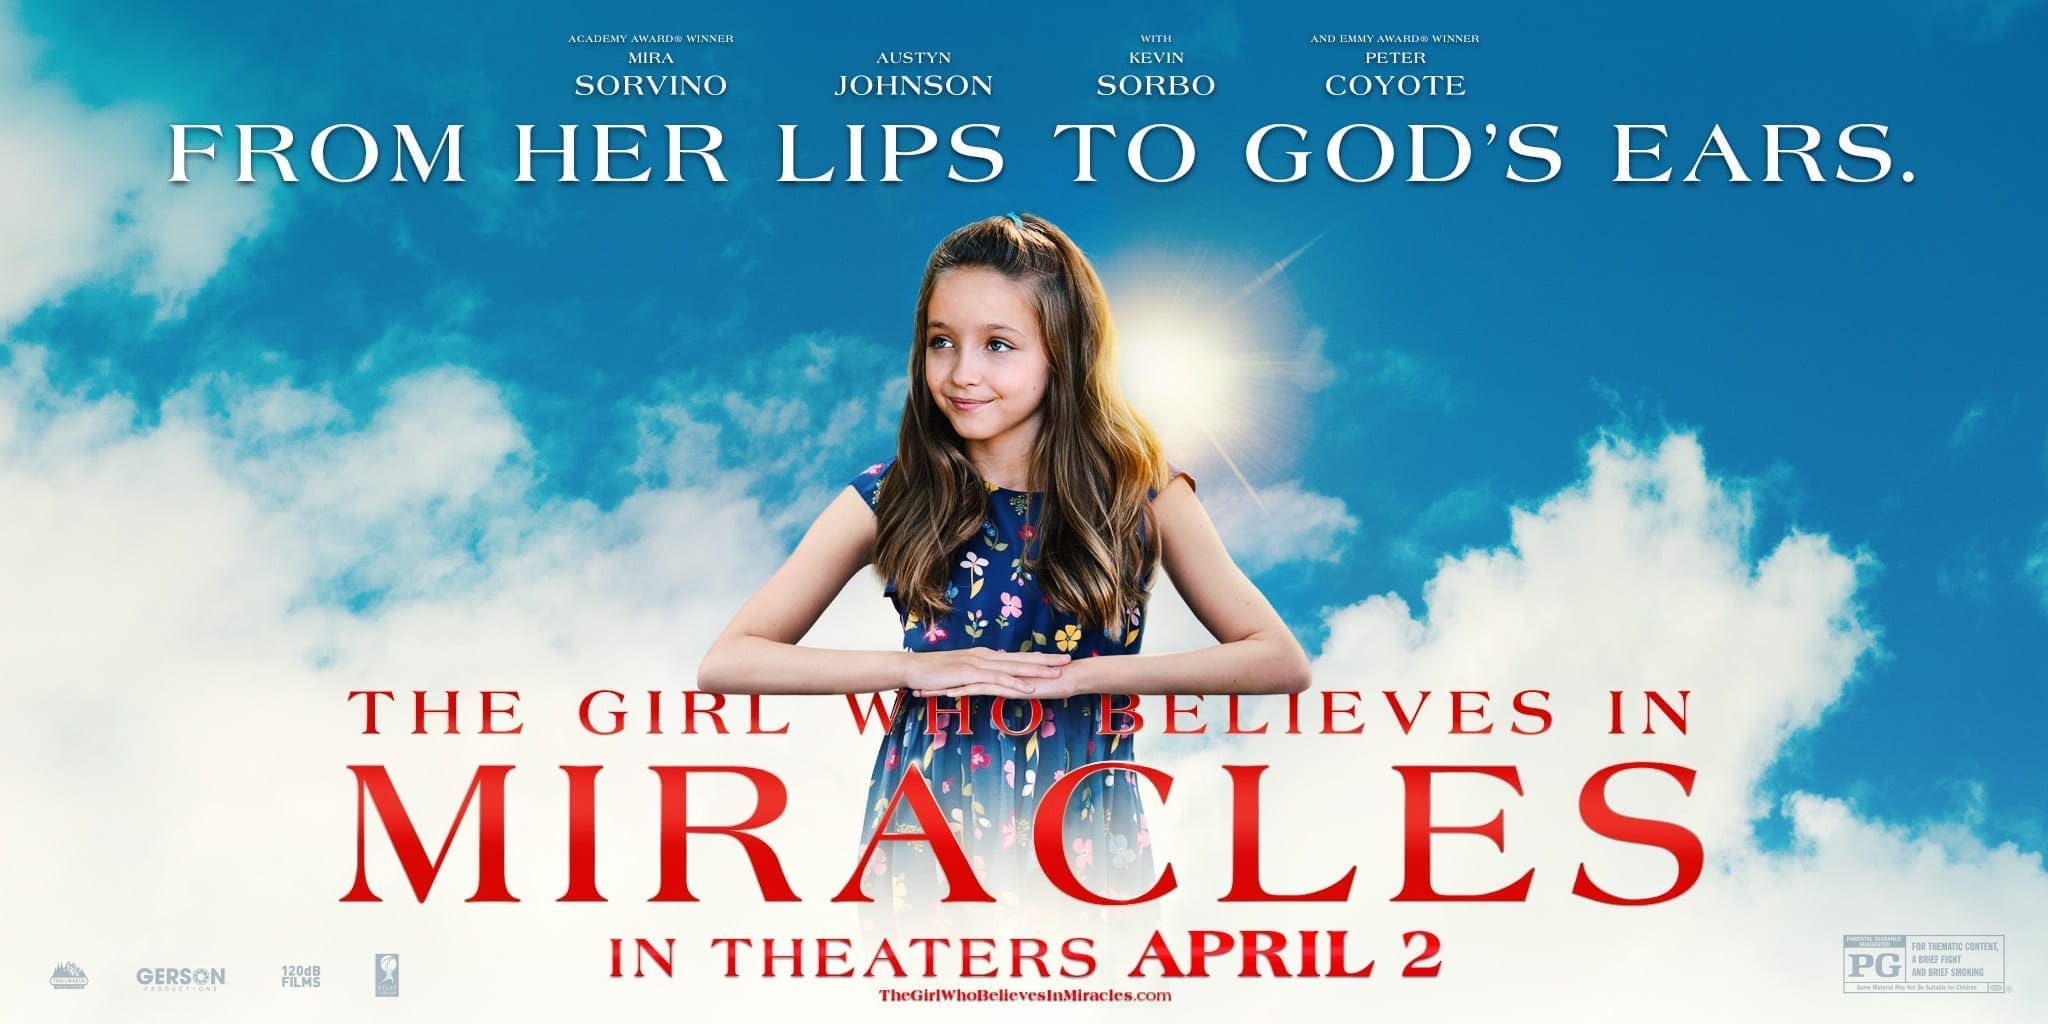 The Girl Who Believes in Miracles” in Theatres April 2 - Oklahoma Film and Music Office